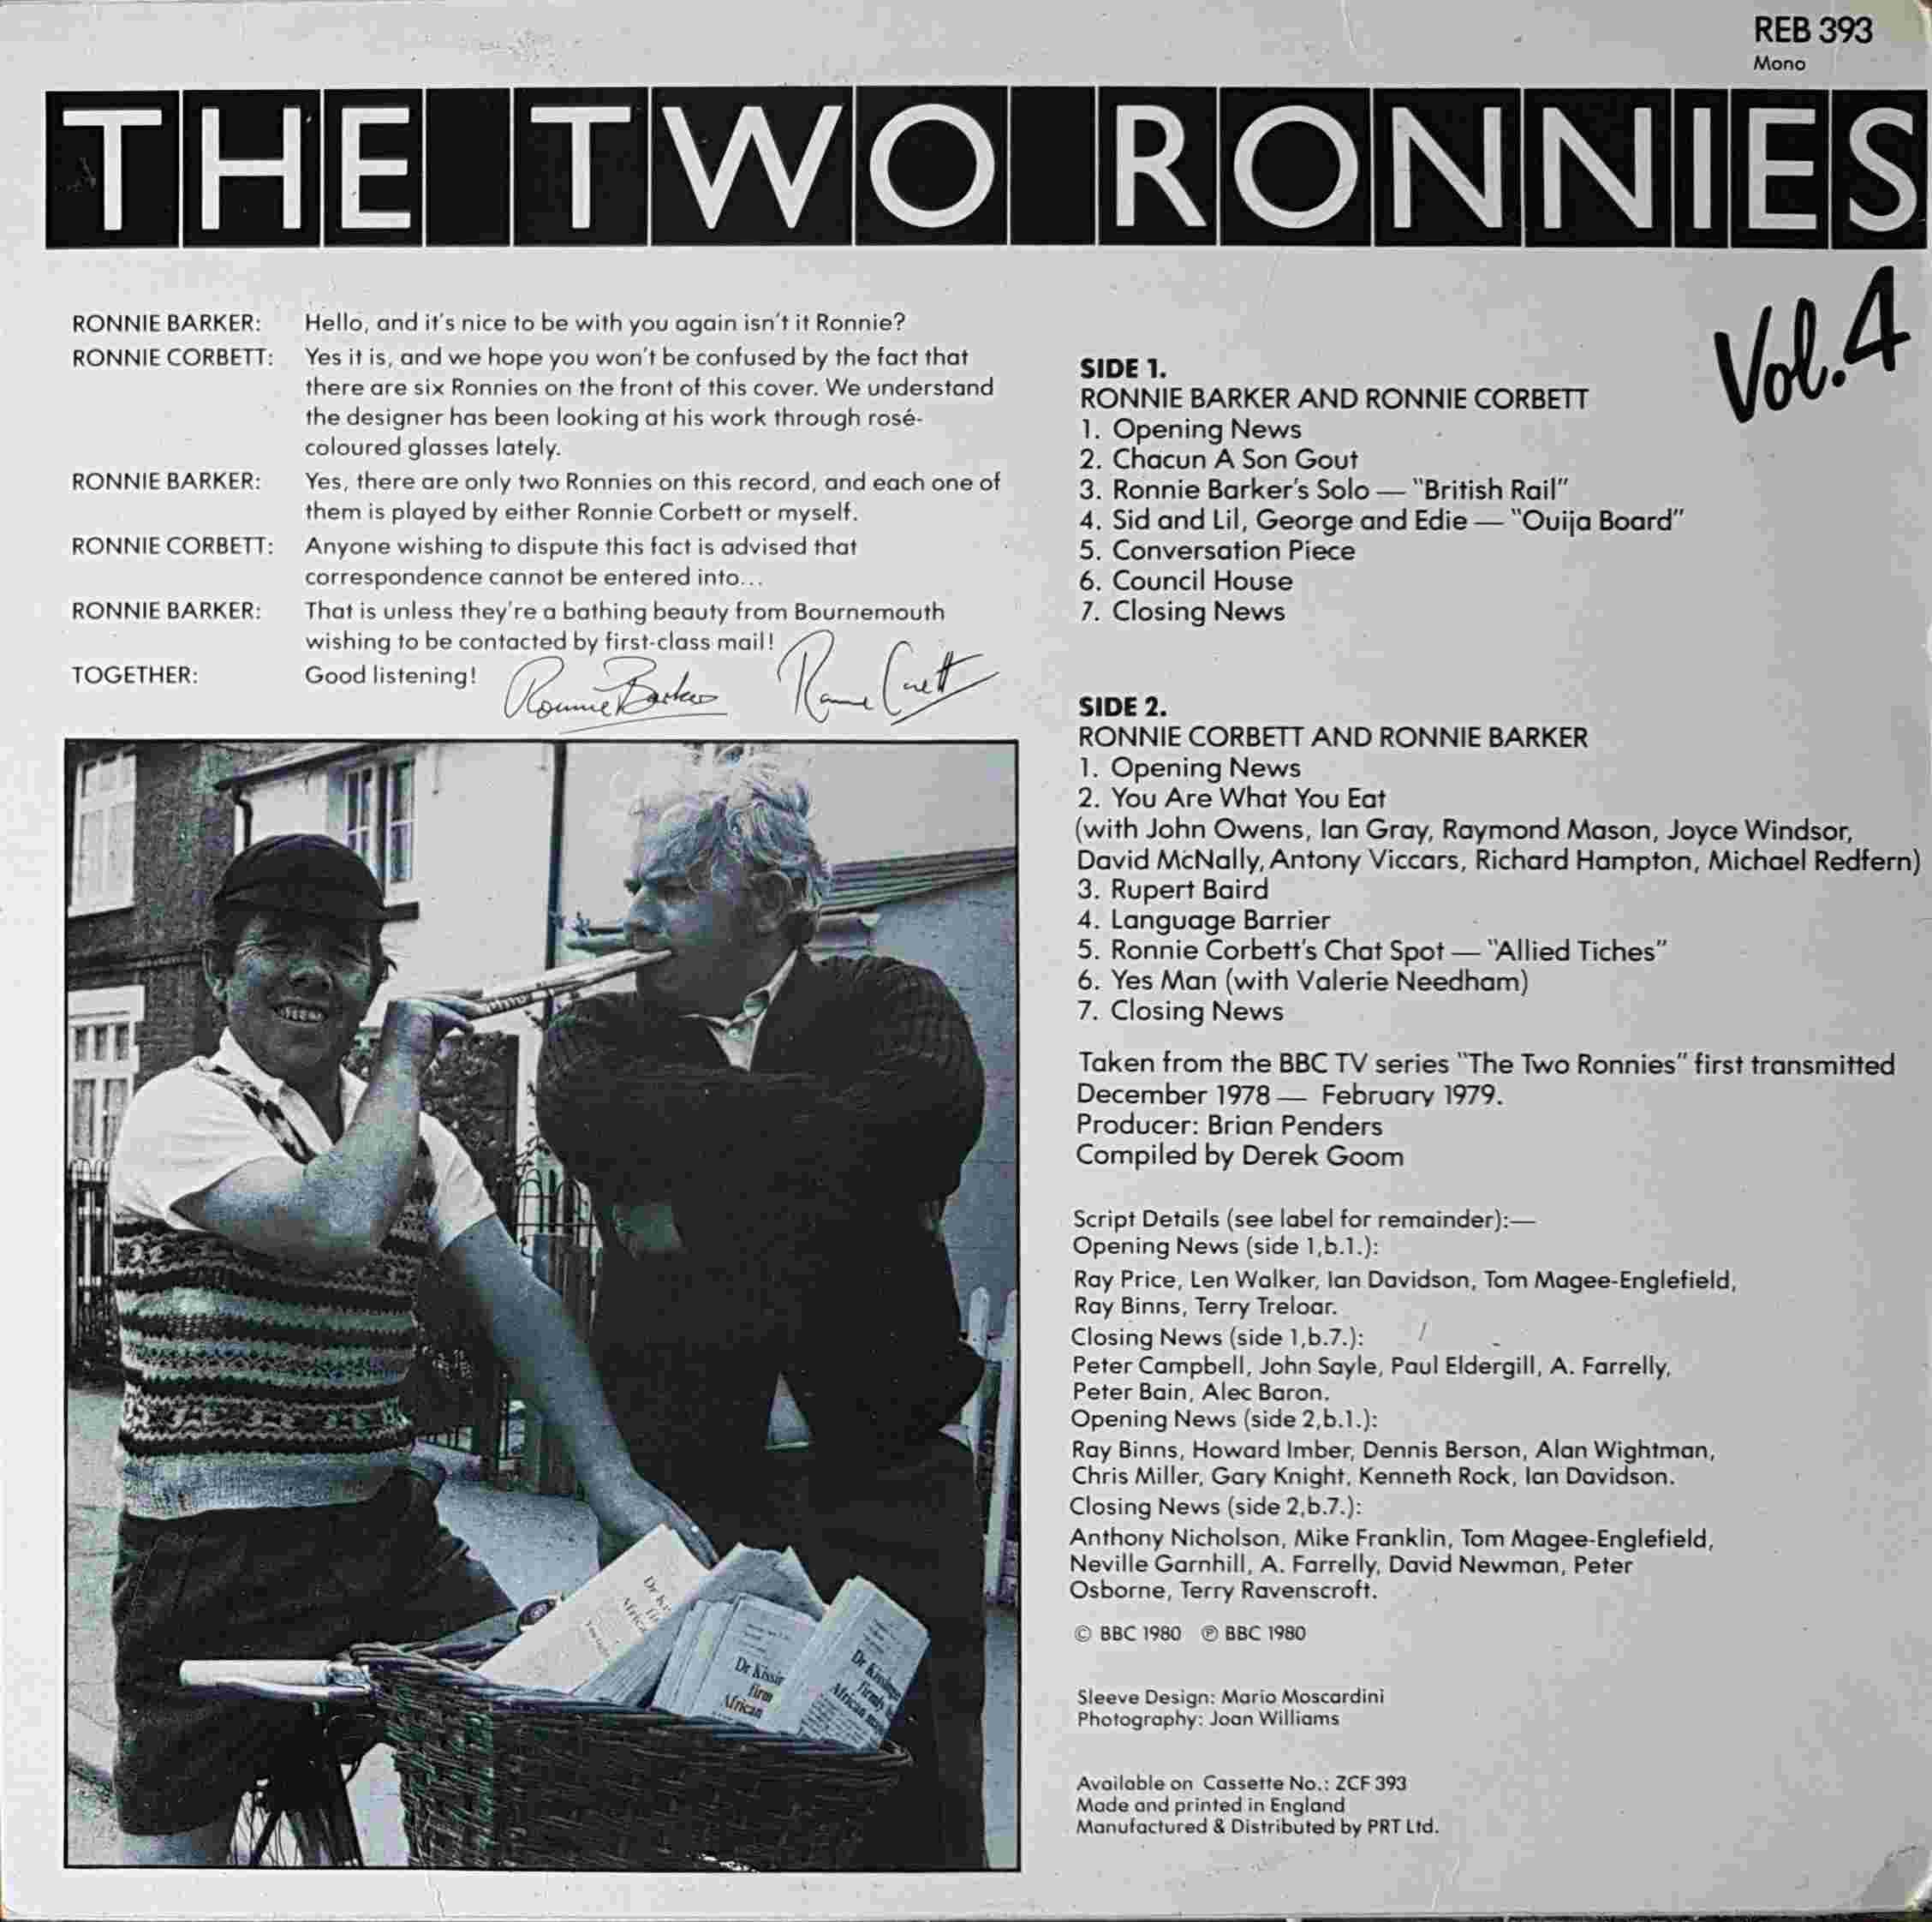 Picture of REB 393 The two Ronnies - Volume 4 by artist Various from the BBC records and Tapes library